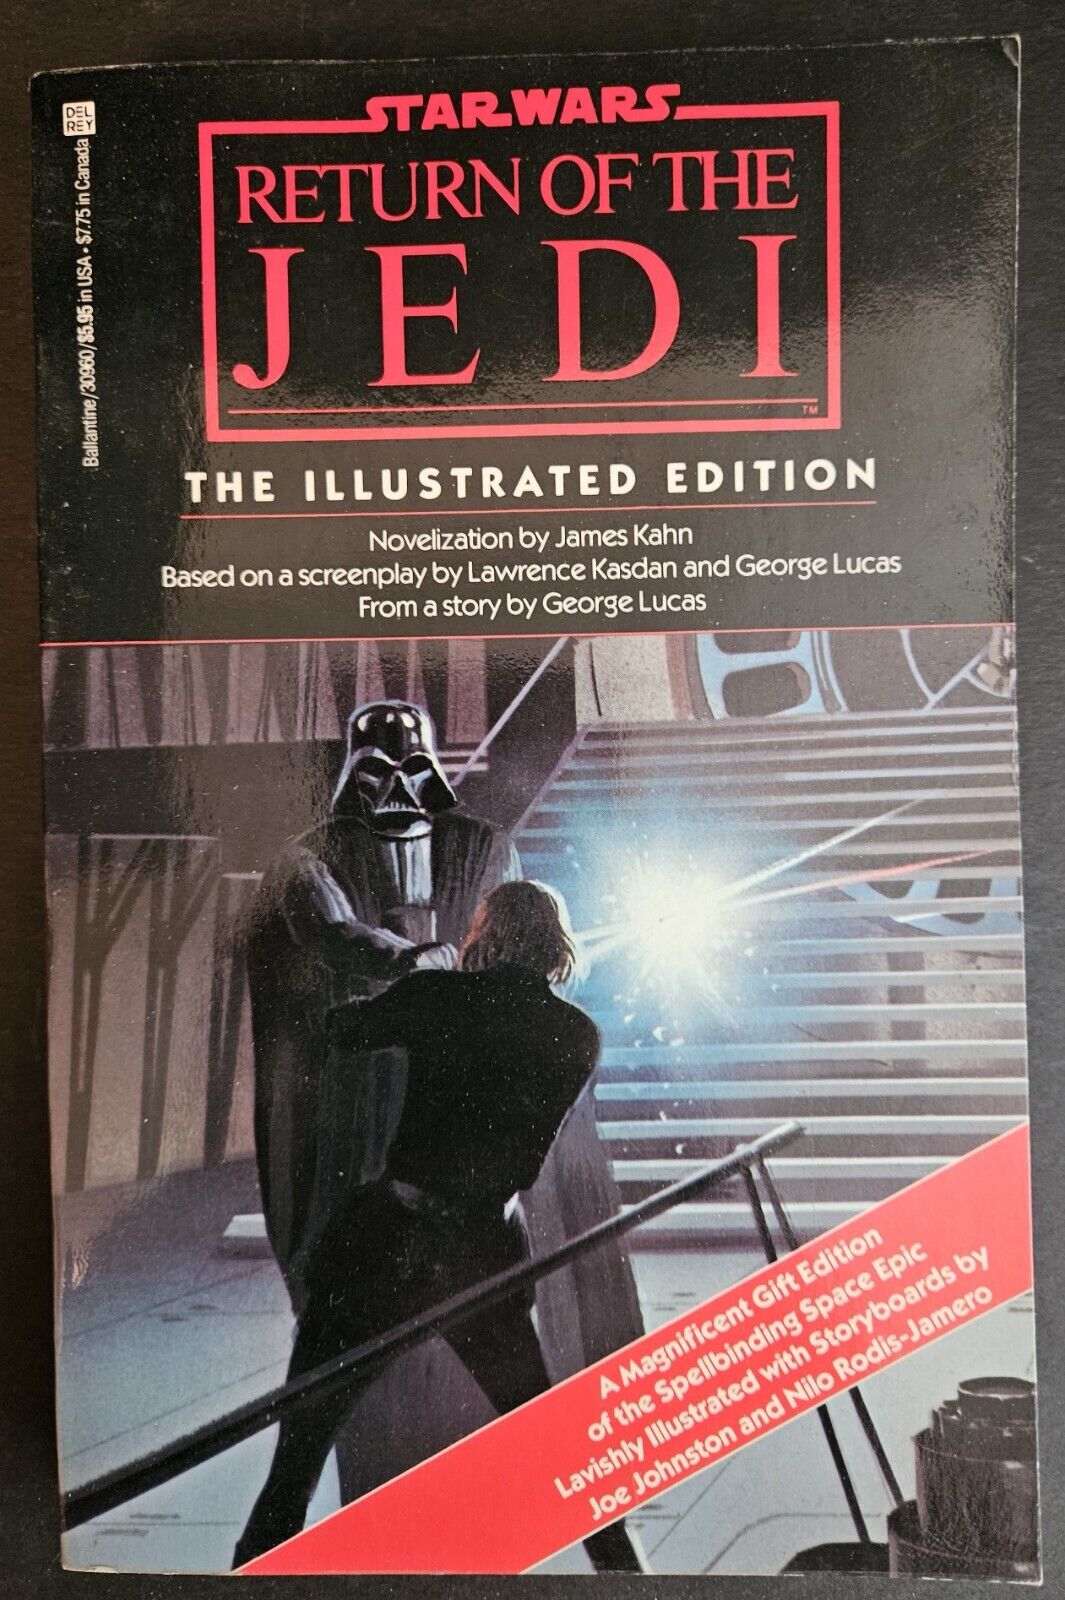 STAR WARS Return Of The Jedi ILLUSTRATED EDITION by James Kahn • 1st Ed 1983 NEW